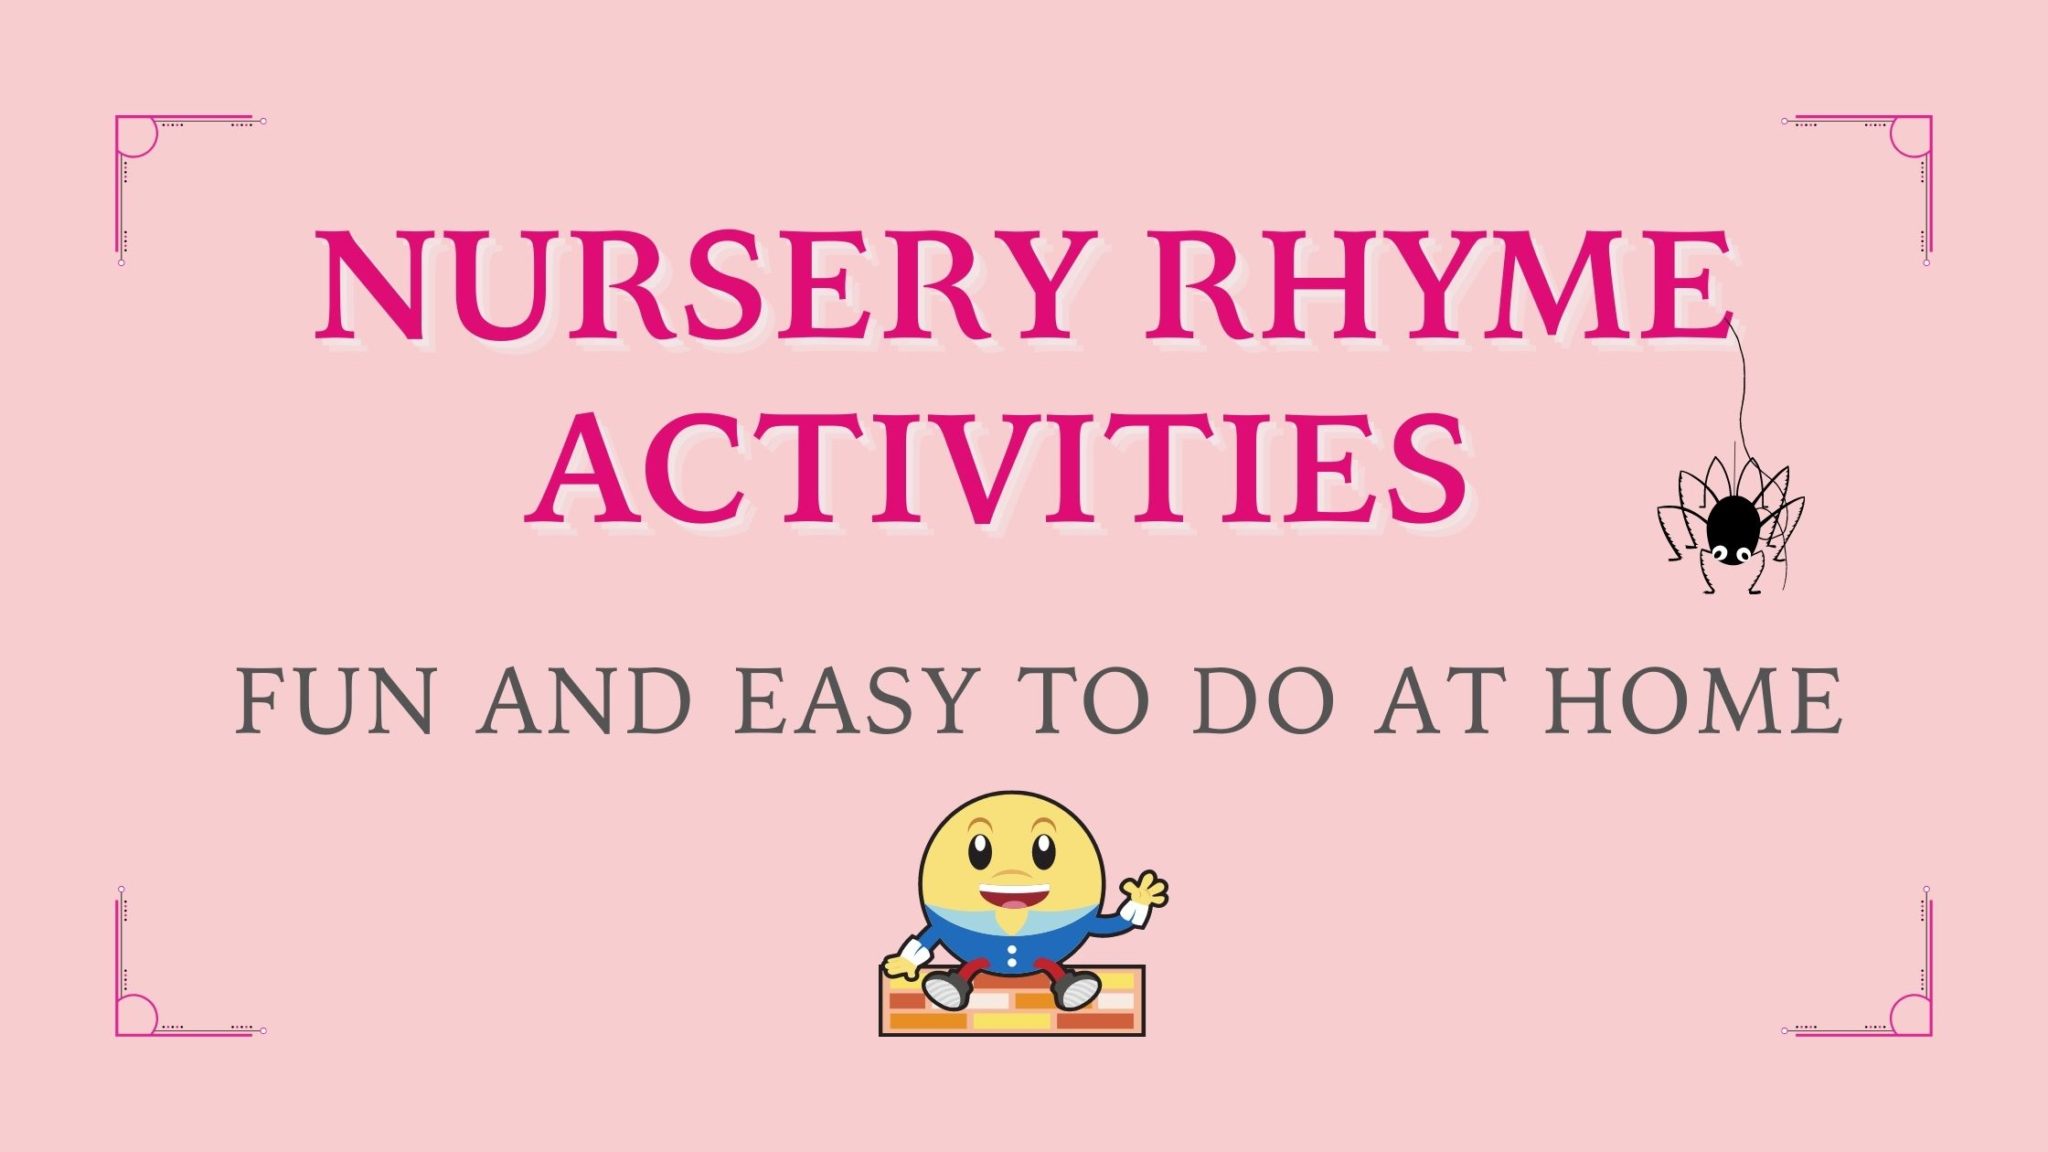 You are currently viewing Nursery Rhyme Activities That Are Fun and Easy to Do at Home